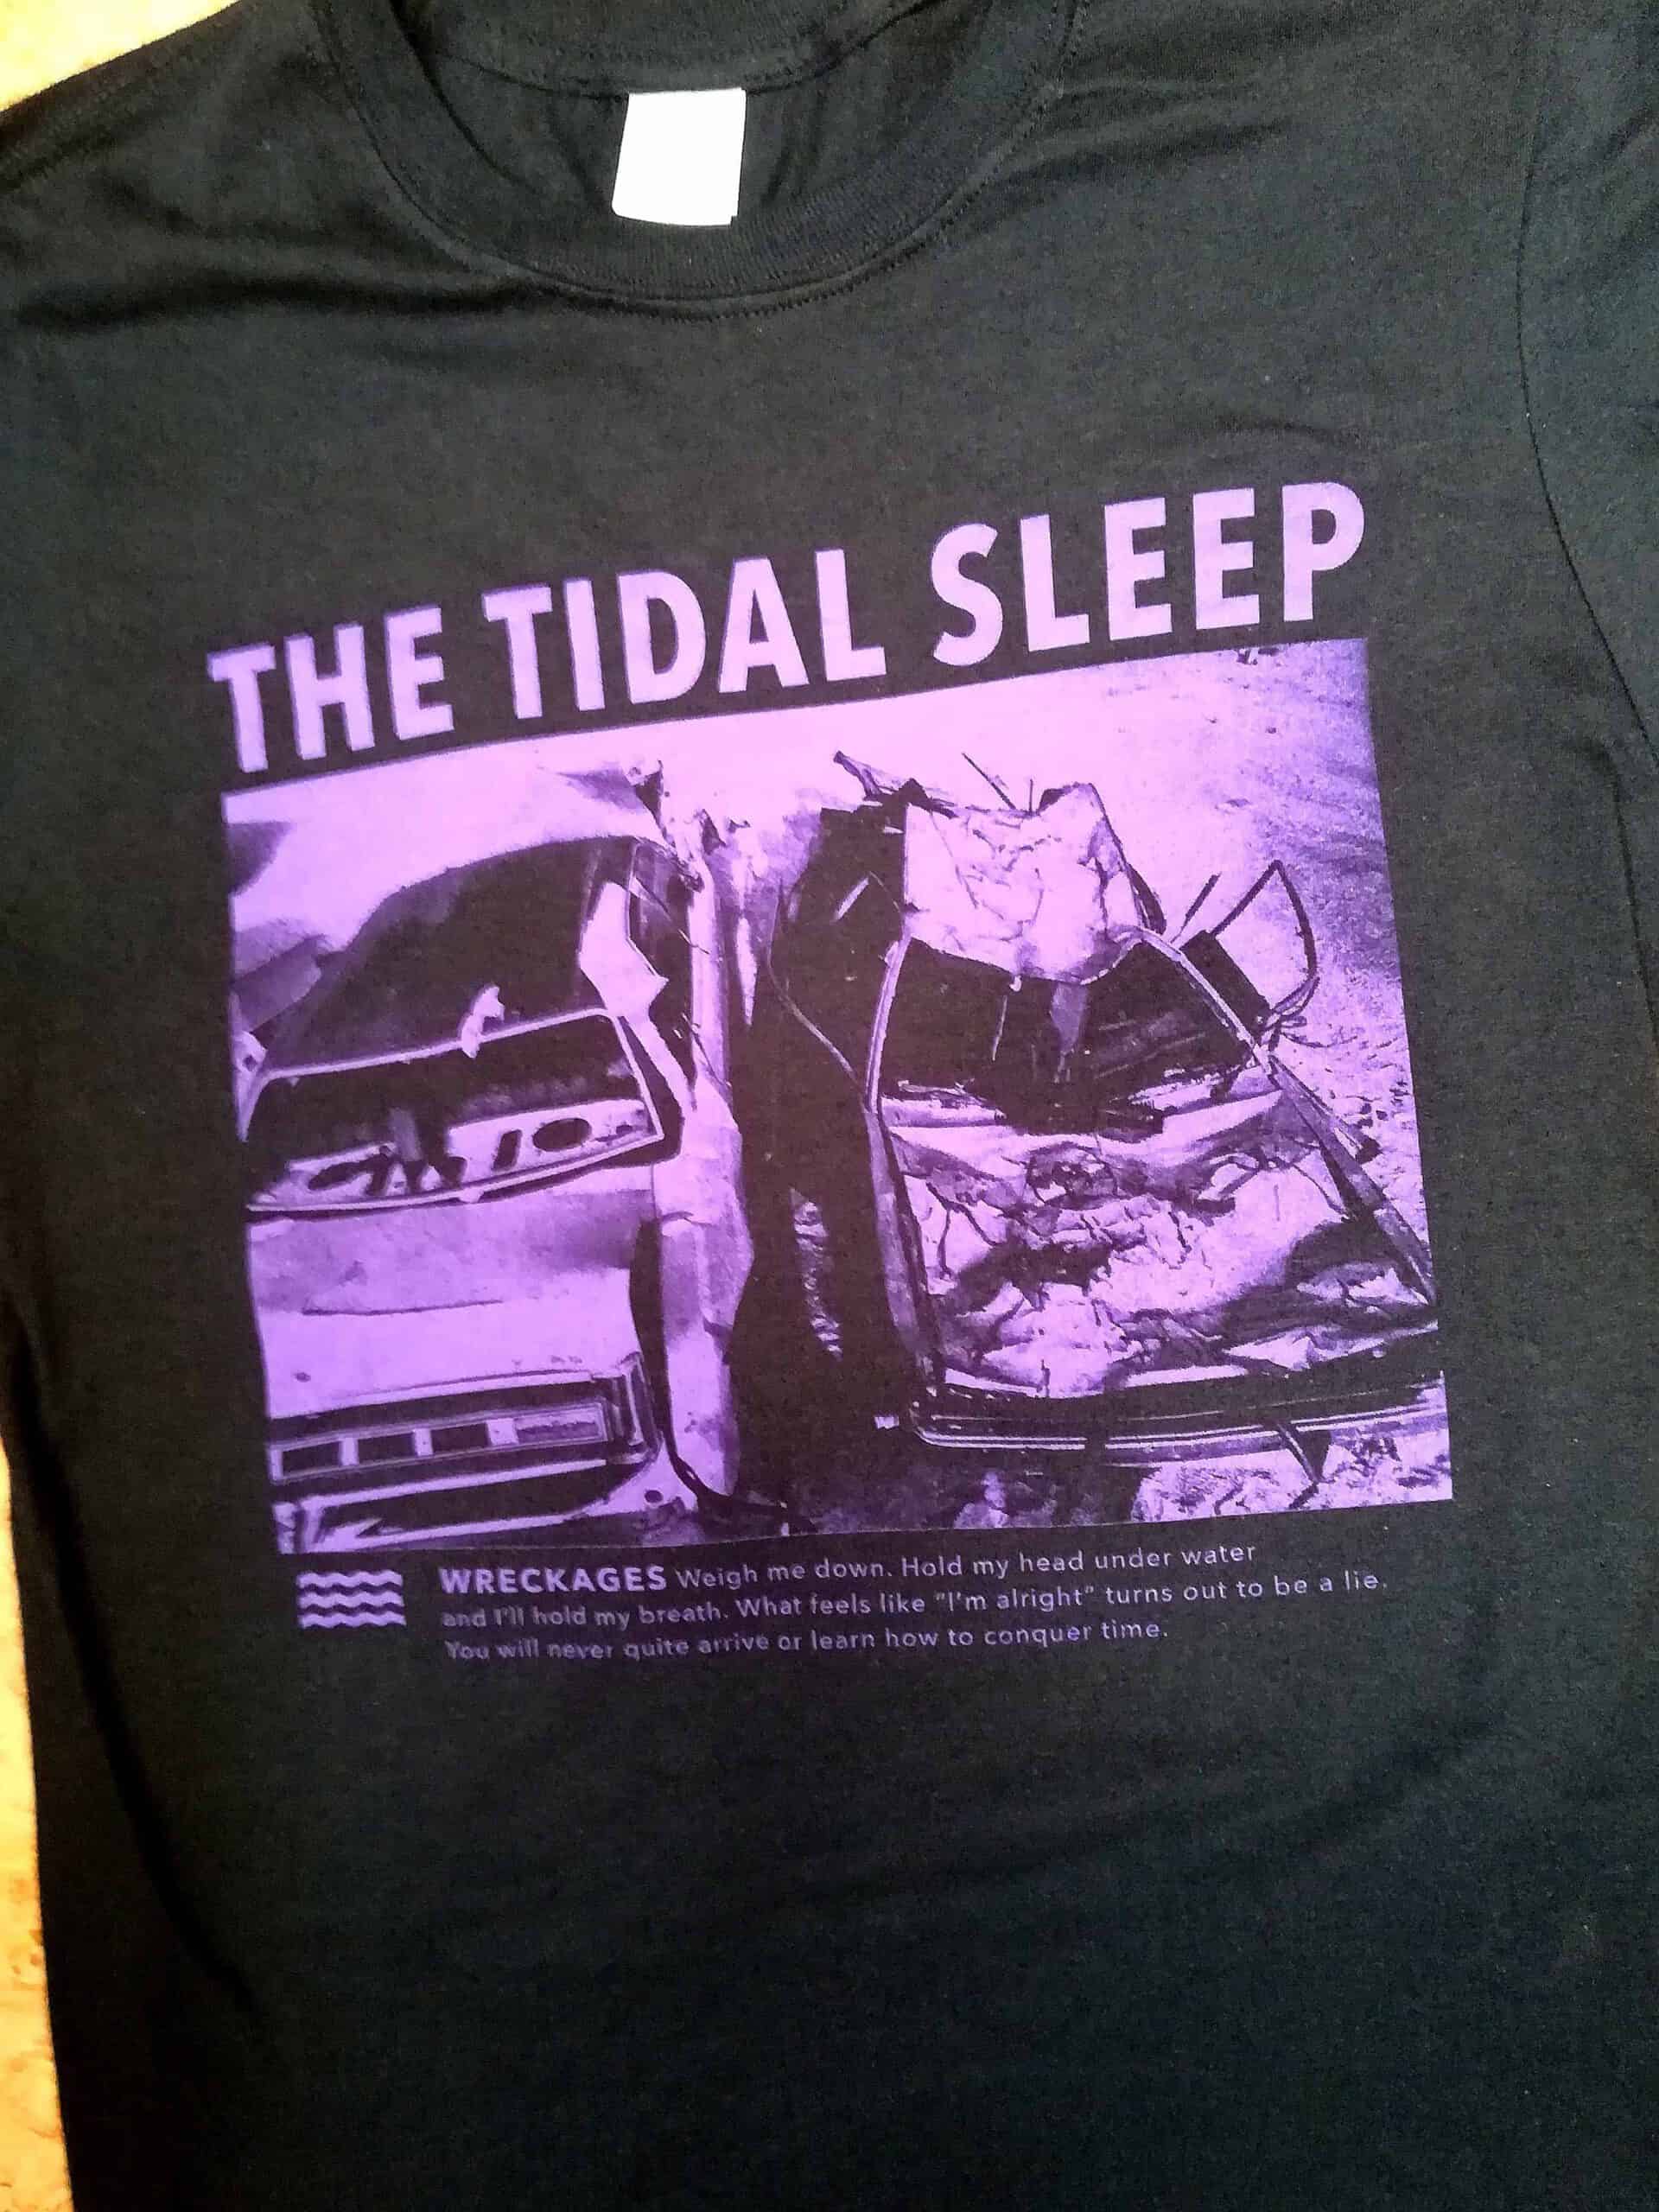 The Tidal Sleep - Wreckages Shirt (purple) Exclusive The Tidal Sleep Shirt bei TCM im limitierten coulourway! 25 copies made!